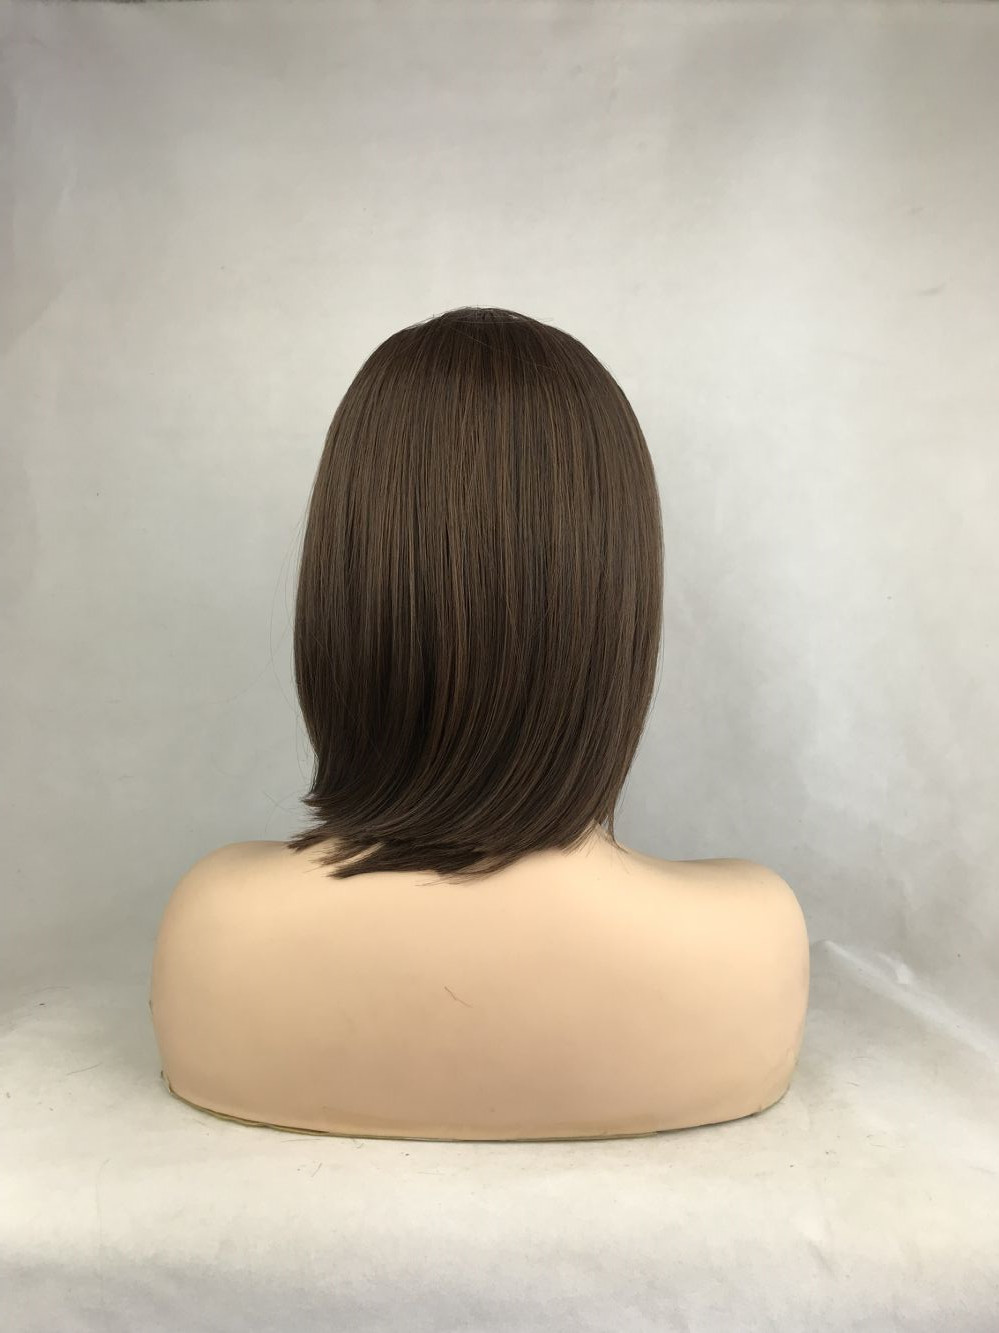 Medium Bob Hairstyle Hair Straight Lace Front Wig 14 Inches